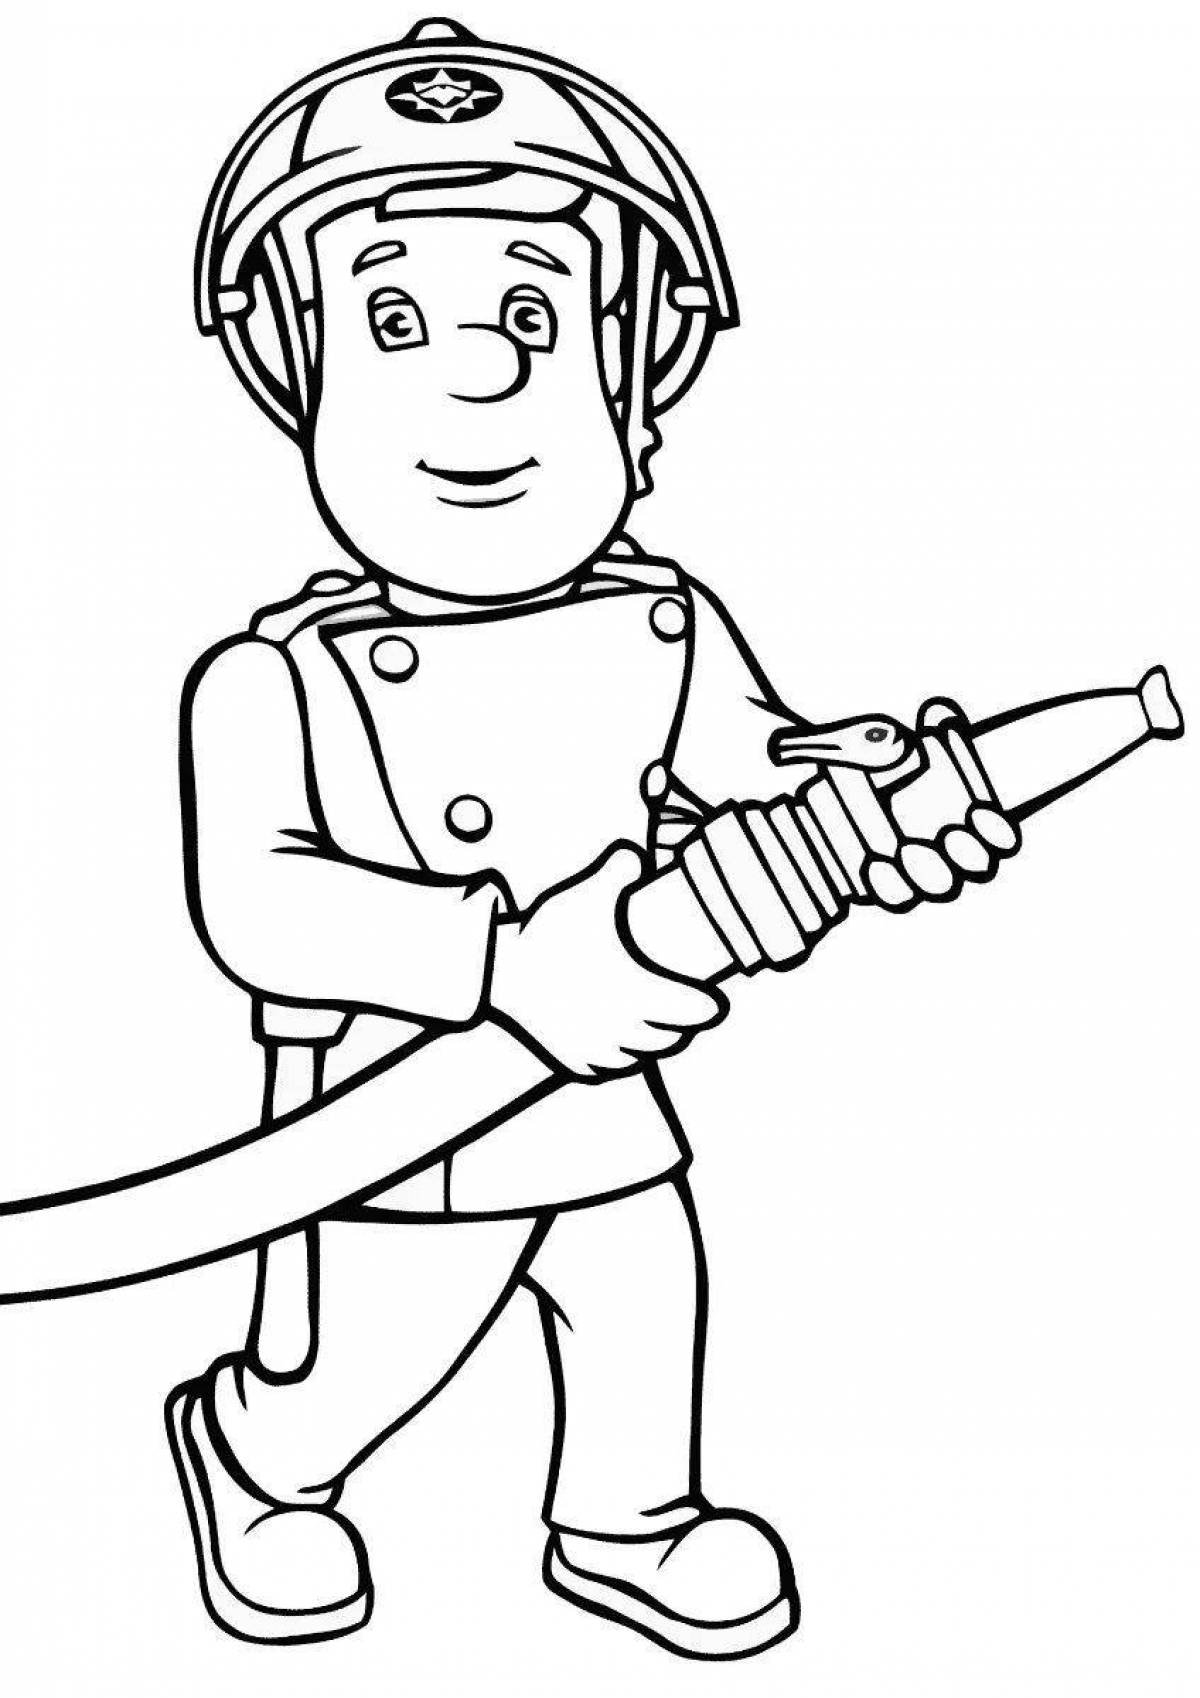 Coloring book fabulous firefighter profession